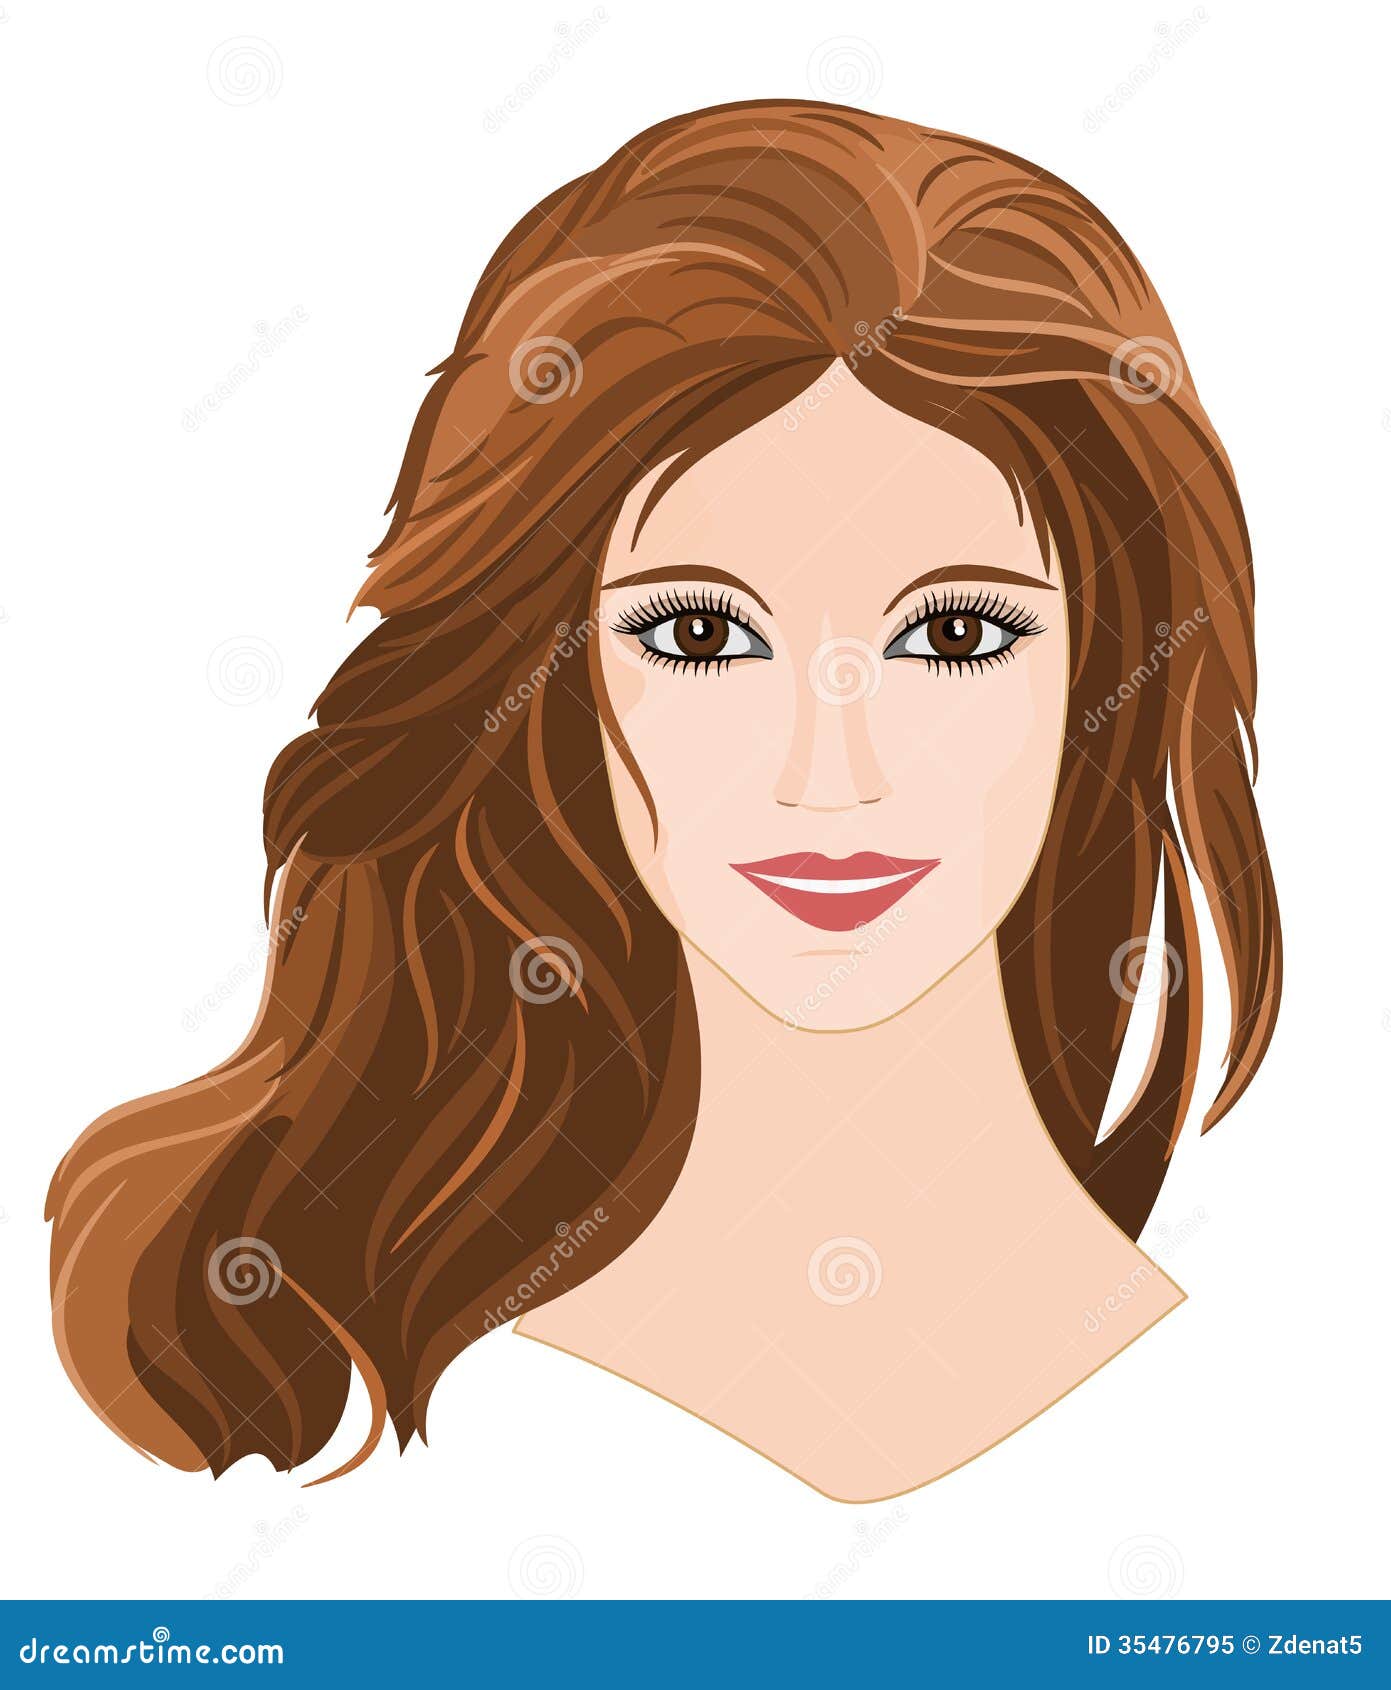 clipart girl with brown hair - photo #34